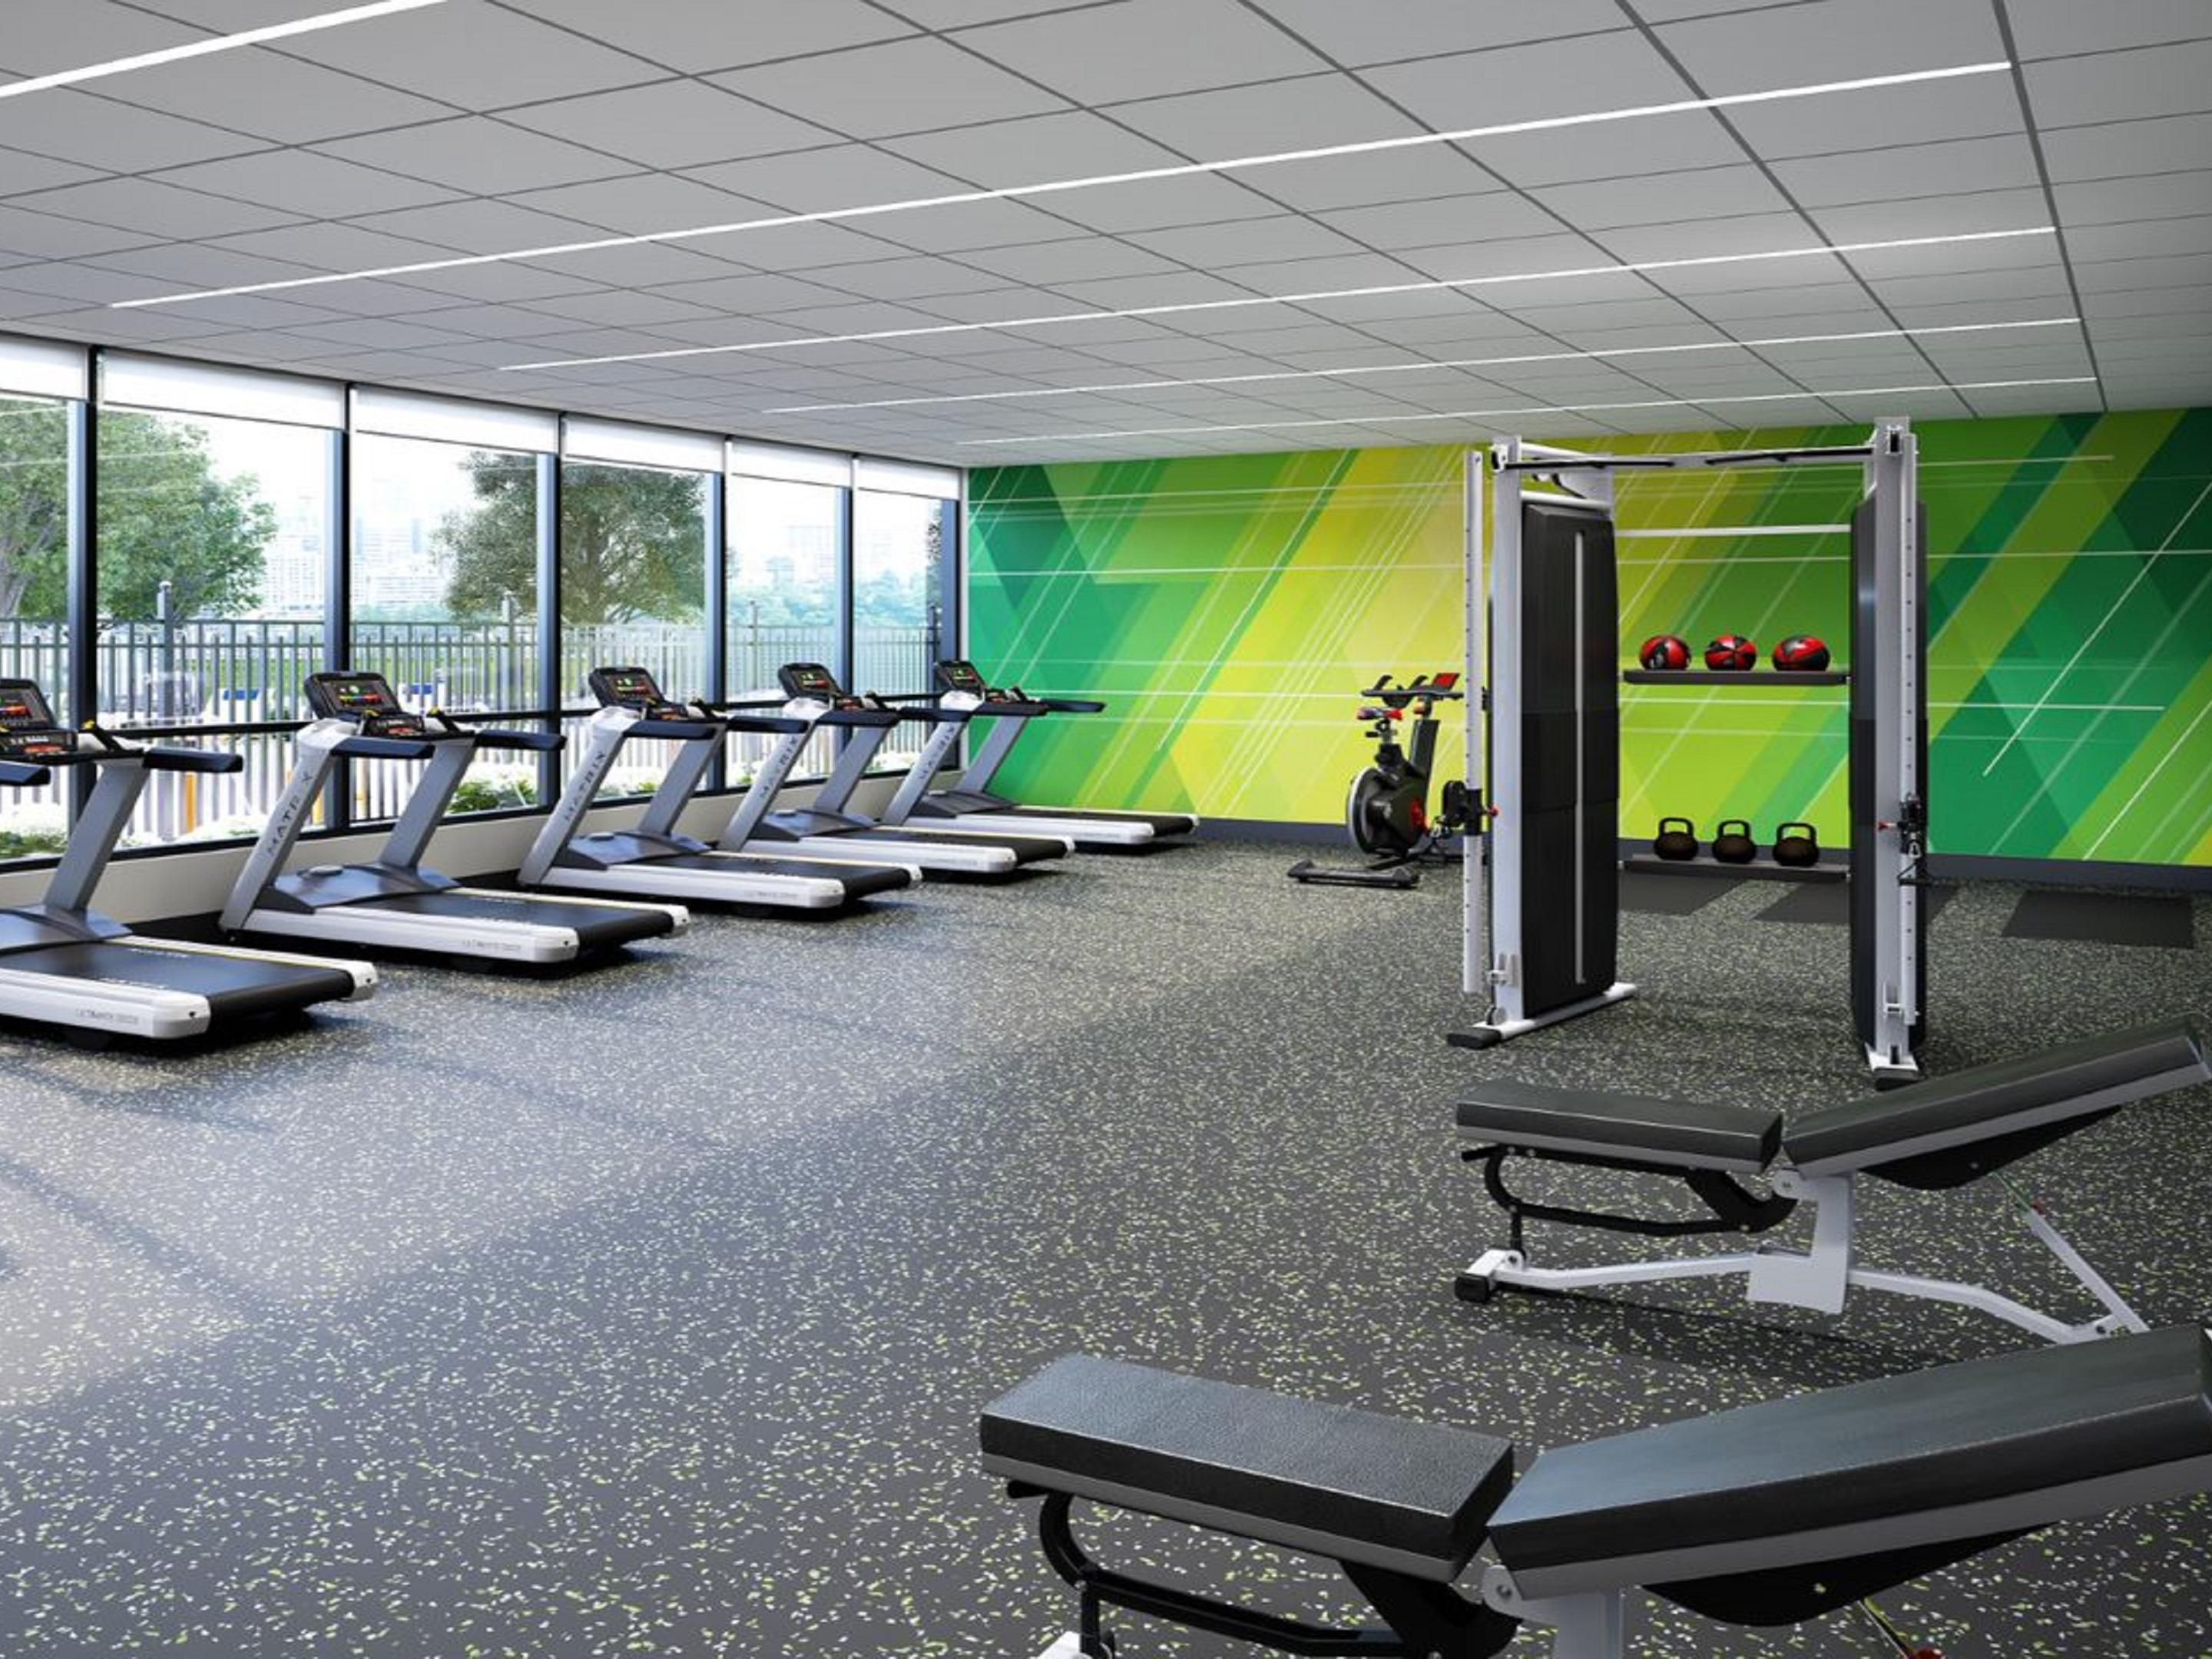 Get your sweat on in our complimentary, fully equipped fitness center- open 24 hours daily.